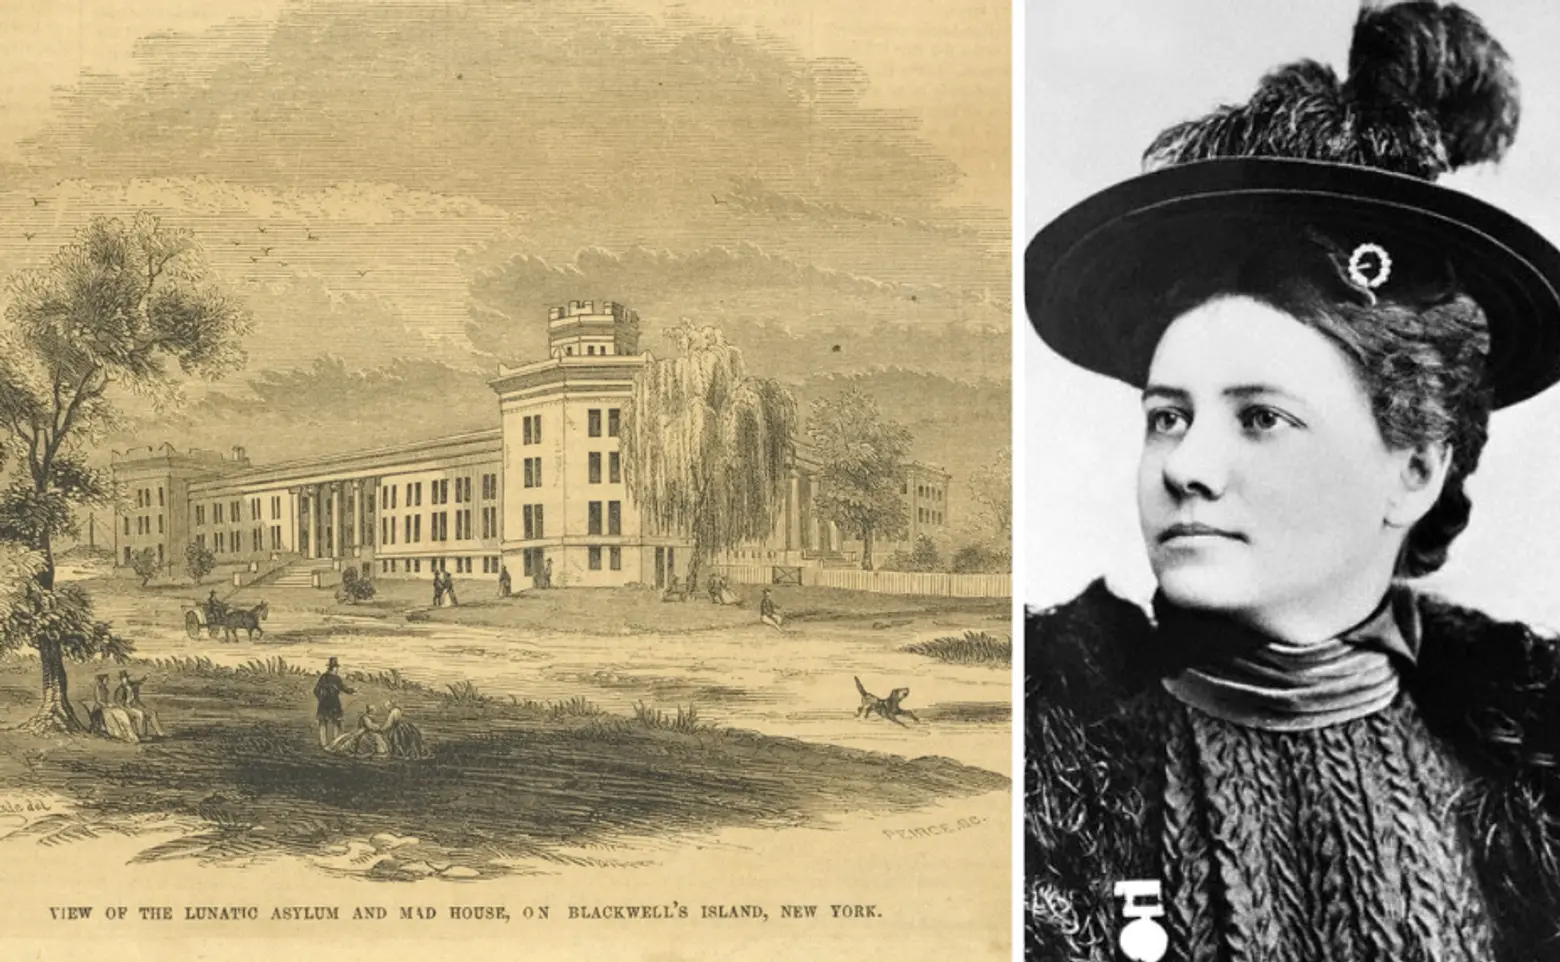 Monument honoring 19th century investigative journalist Nellie Bly coming to Roosevelt Island